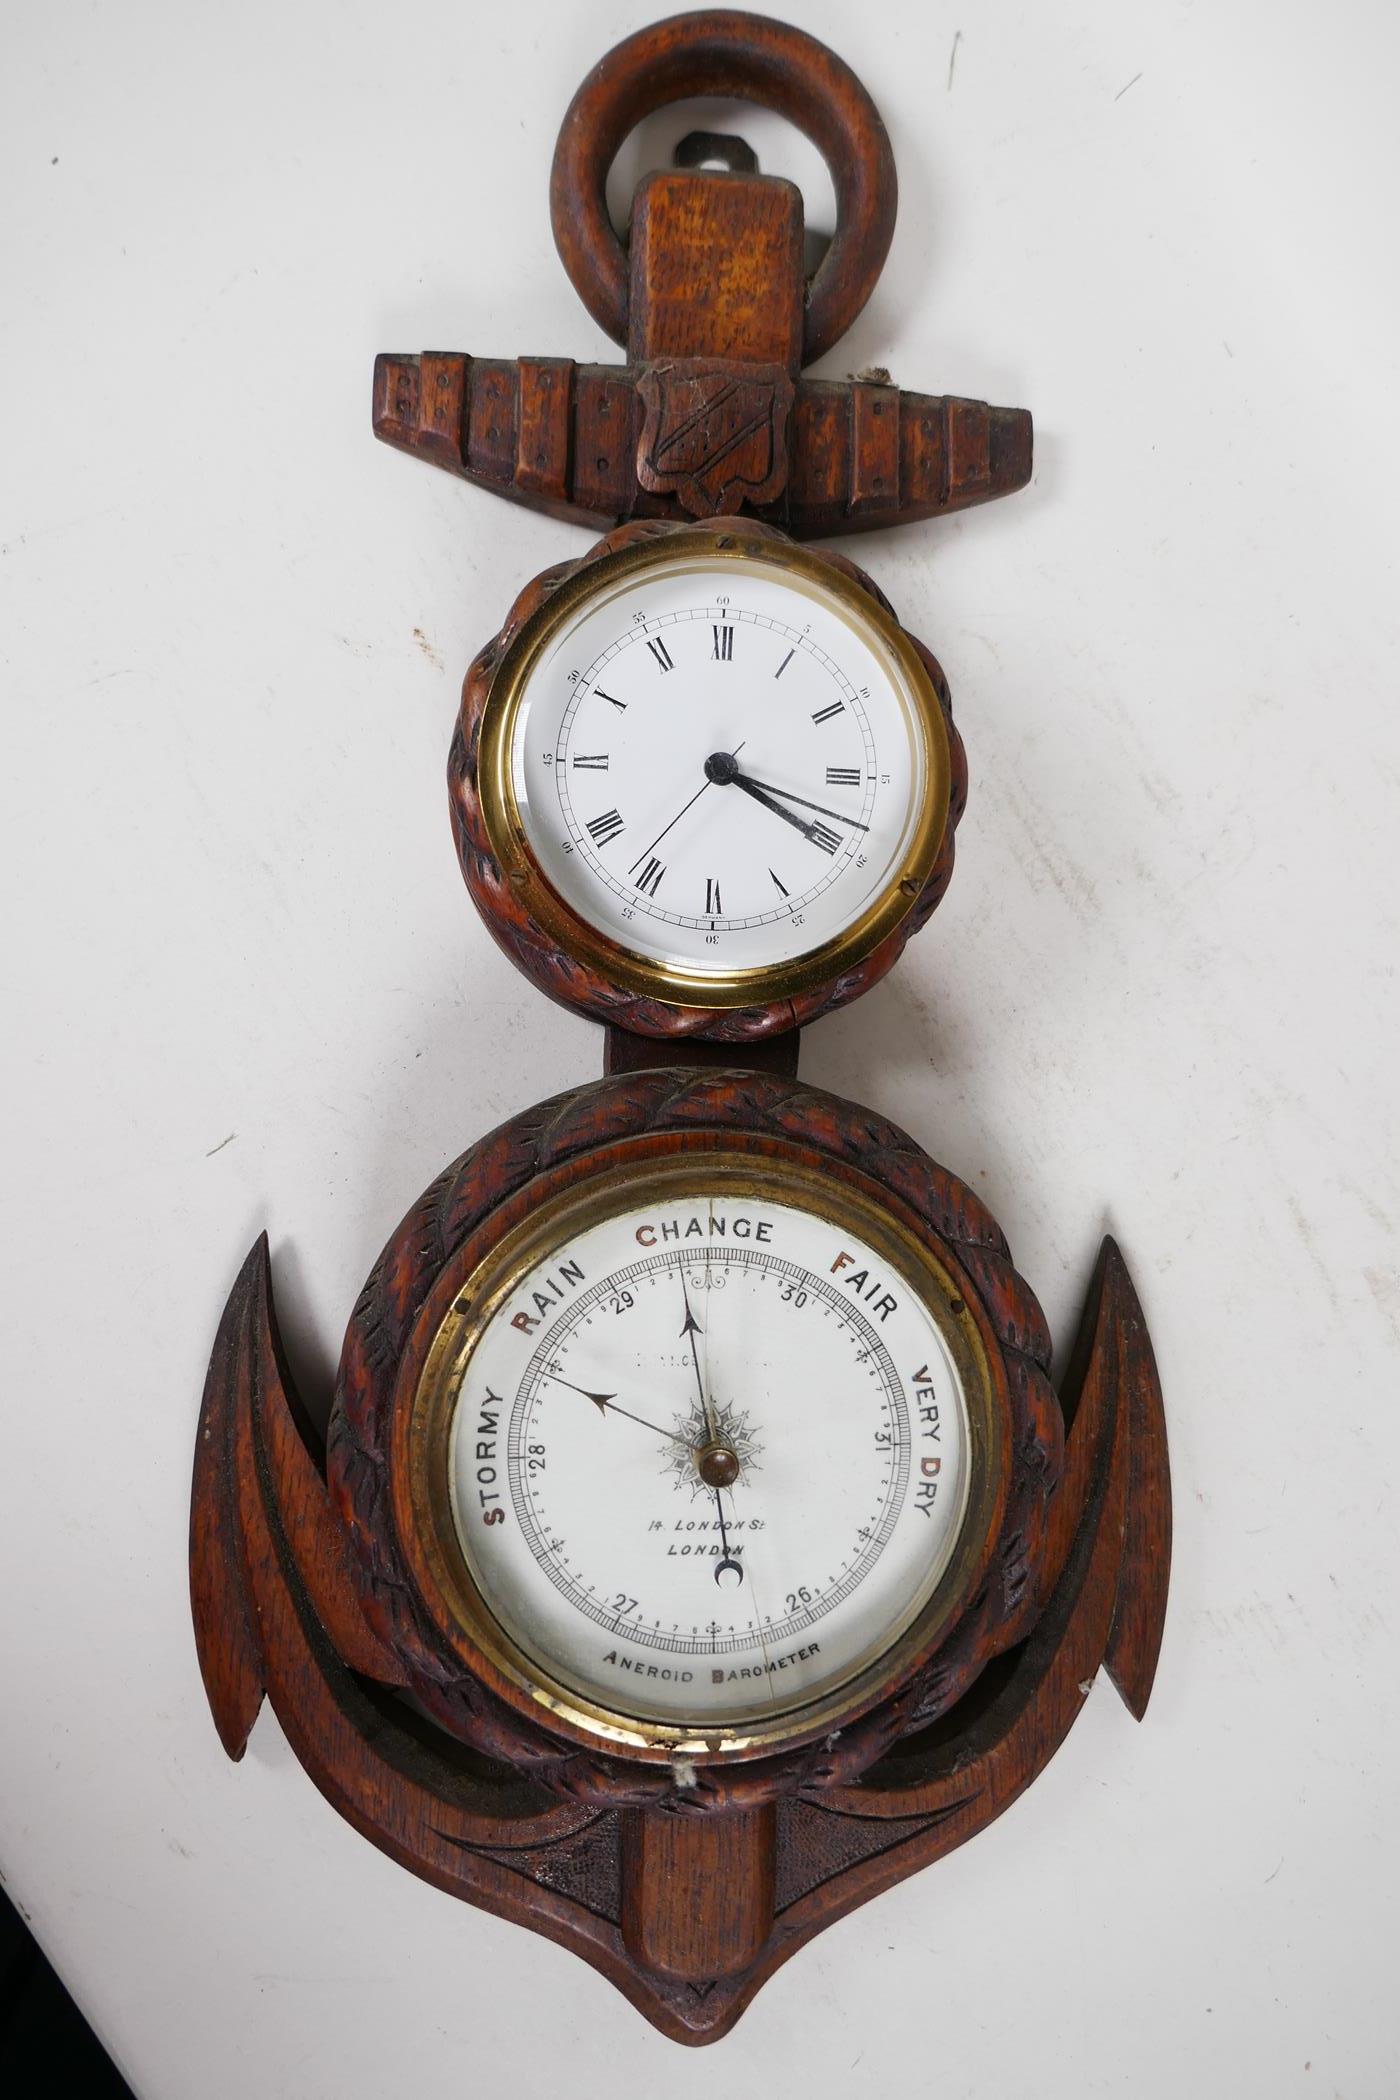 A nautical themed aneroid barometer and clock mounted in a carved oak rope and anchor frame, 21"